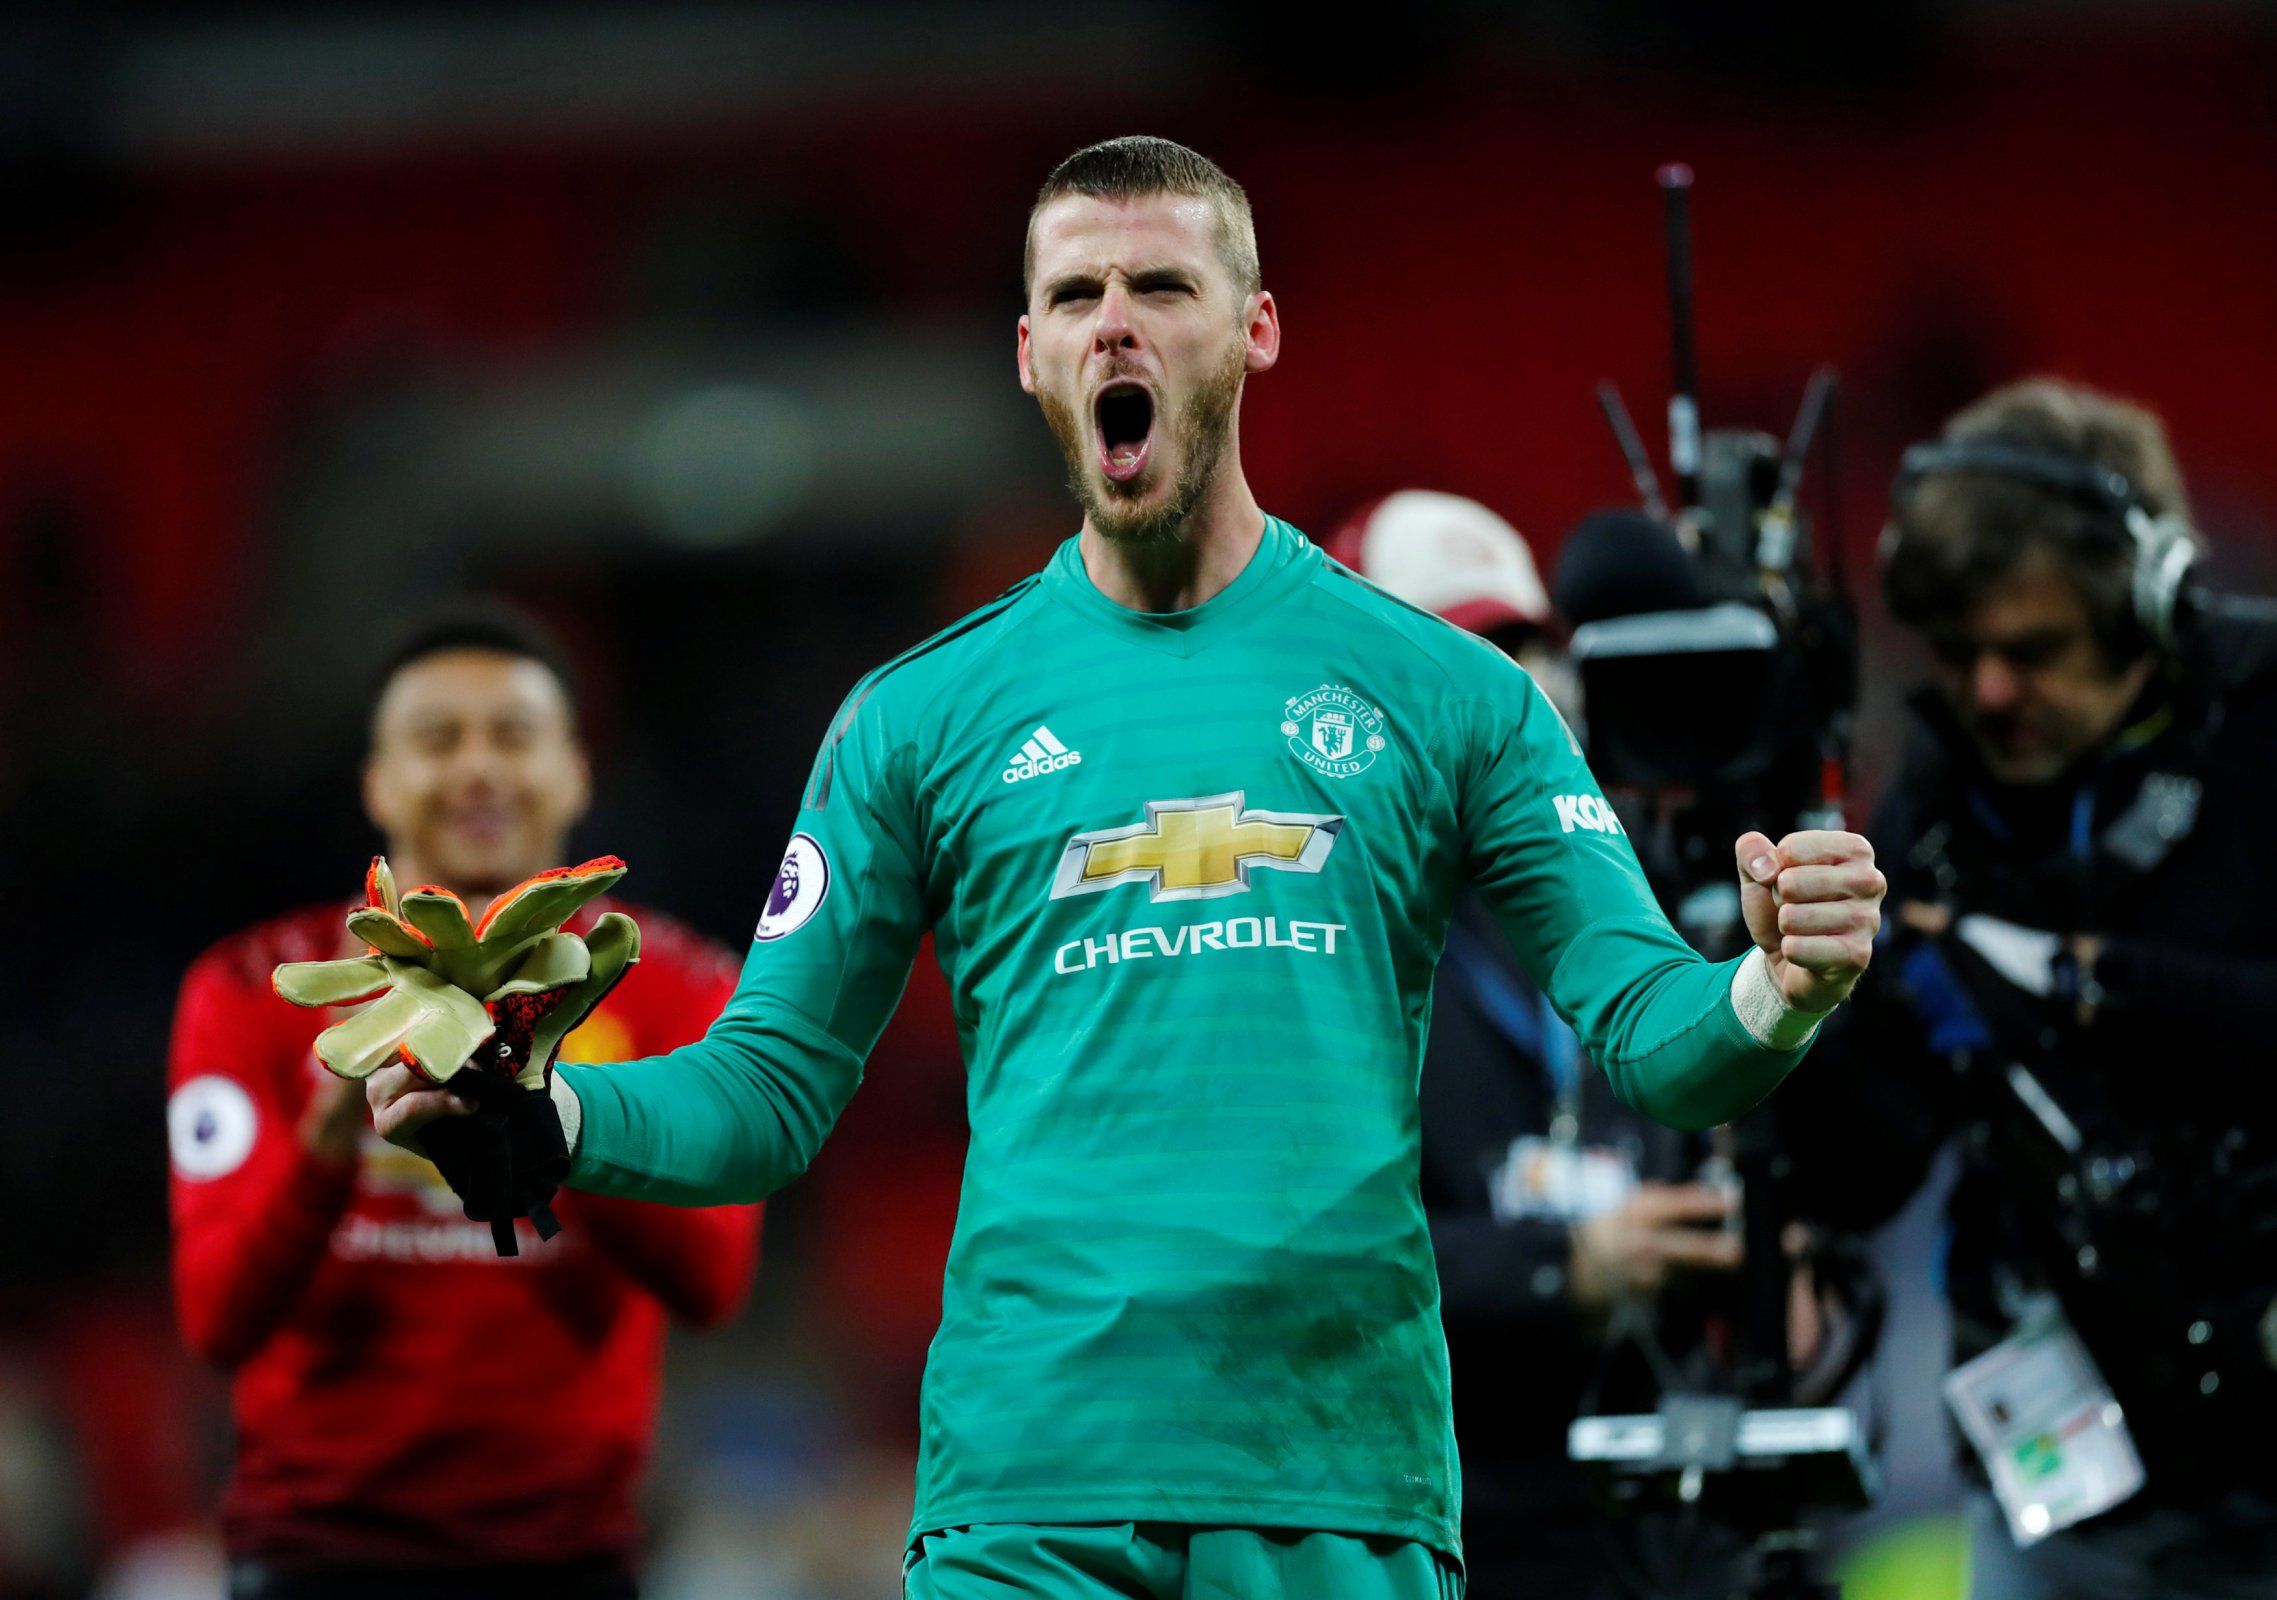 Manchester United's David de Gea celebrates at the end of the Tottenham match